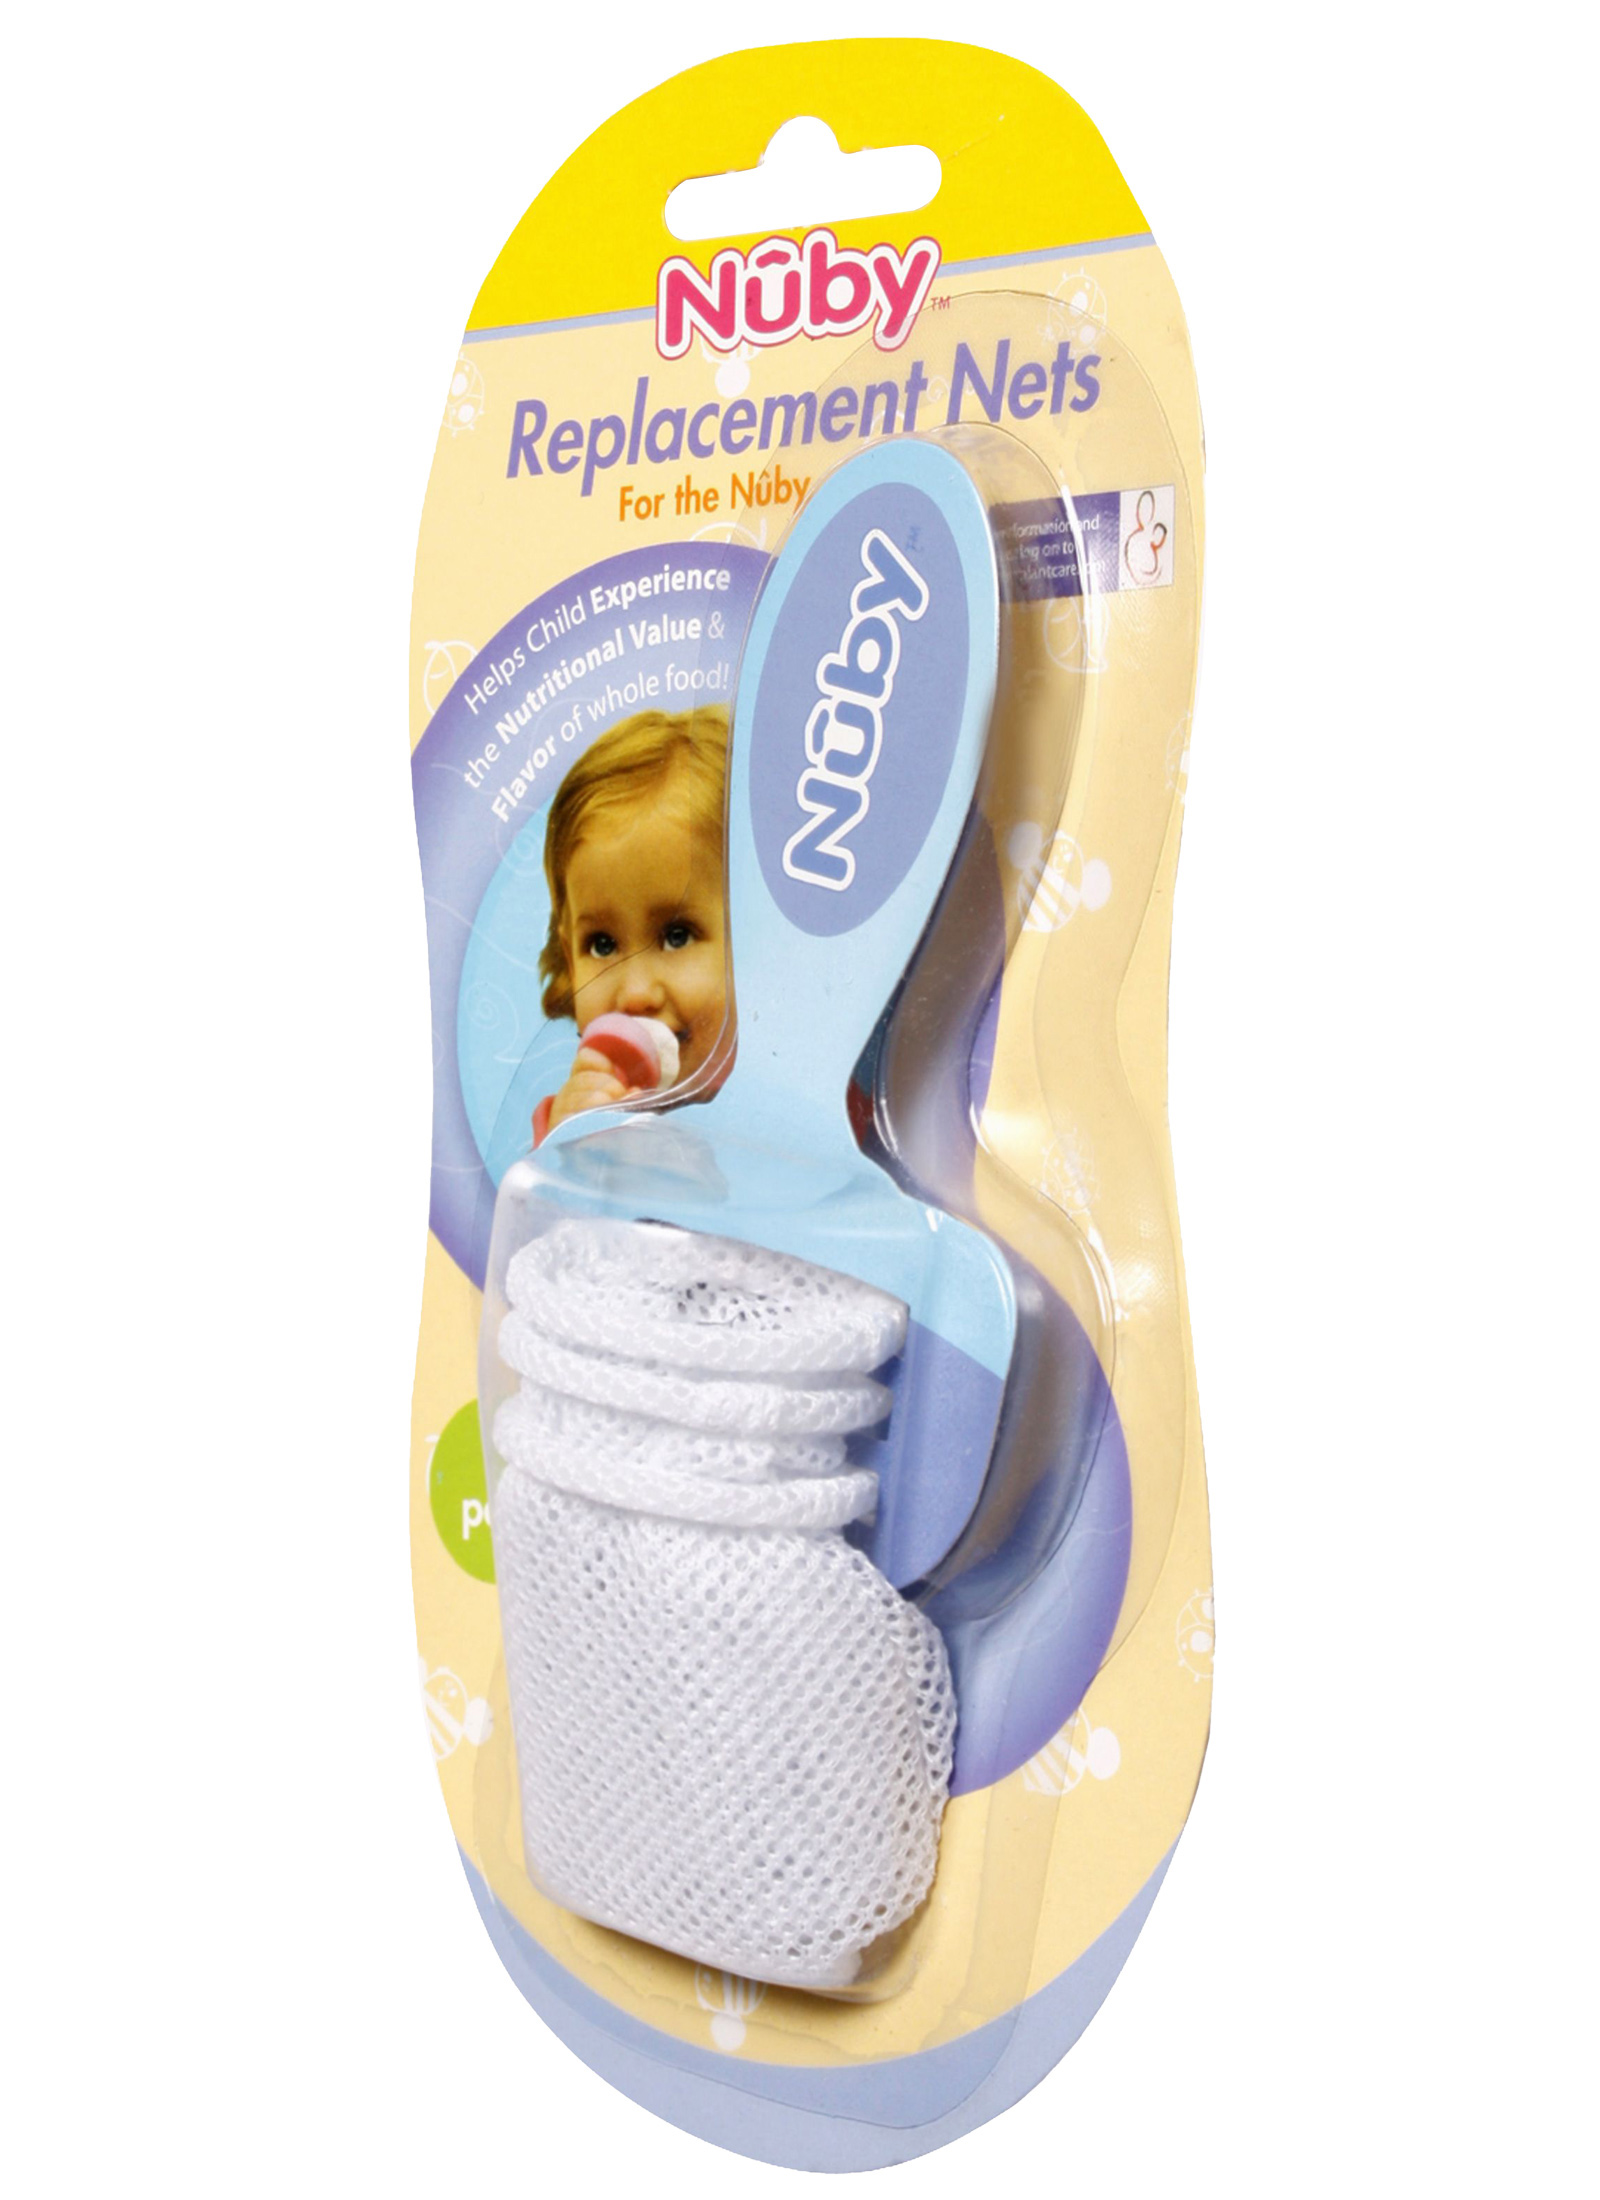 Nuby - Replacement Nets